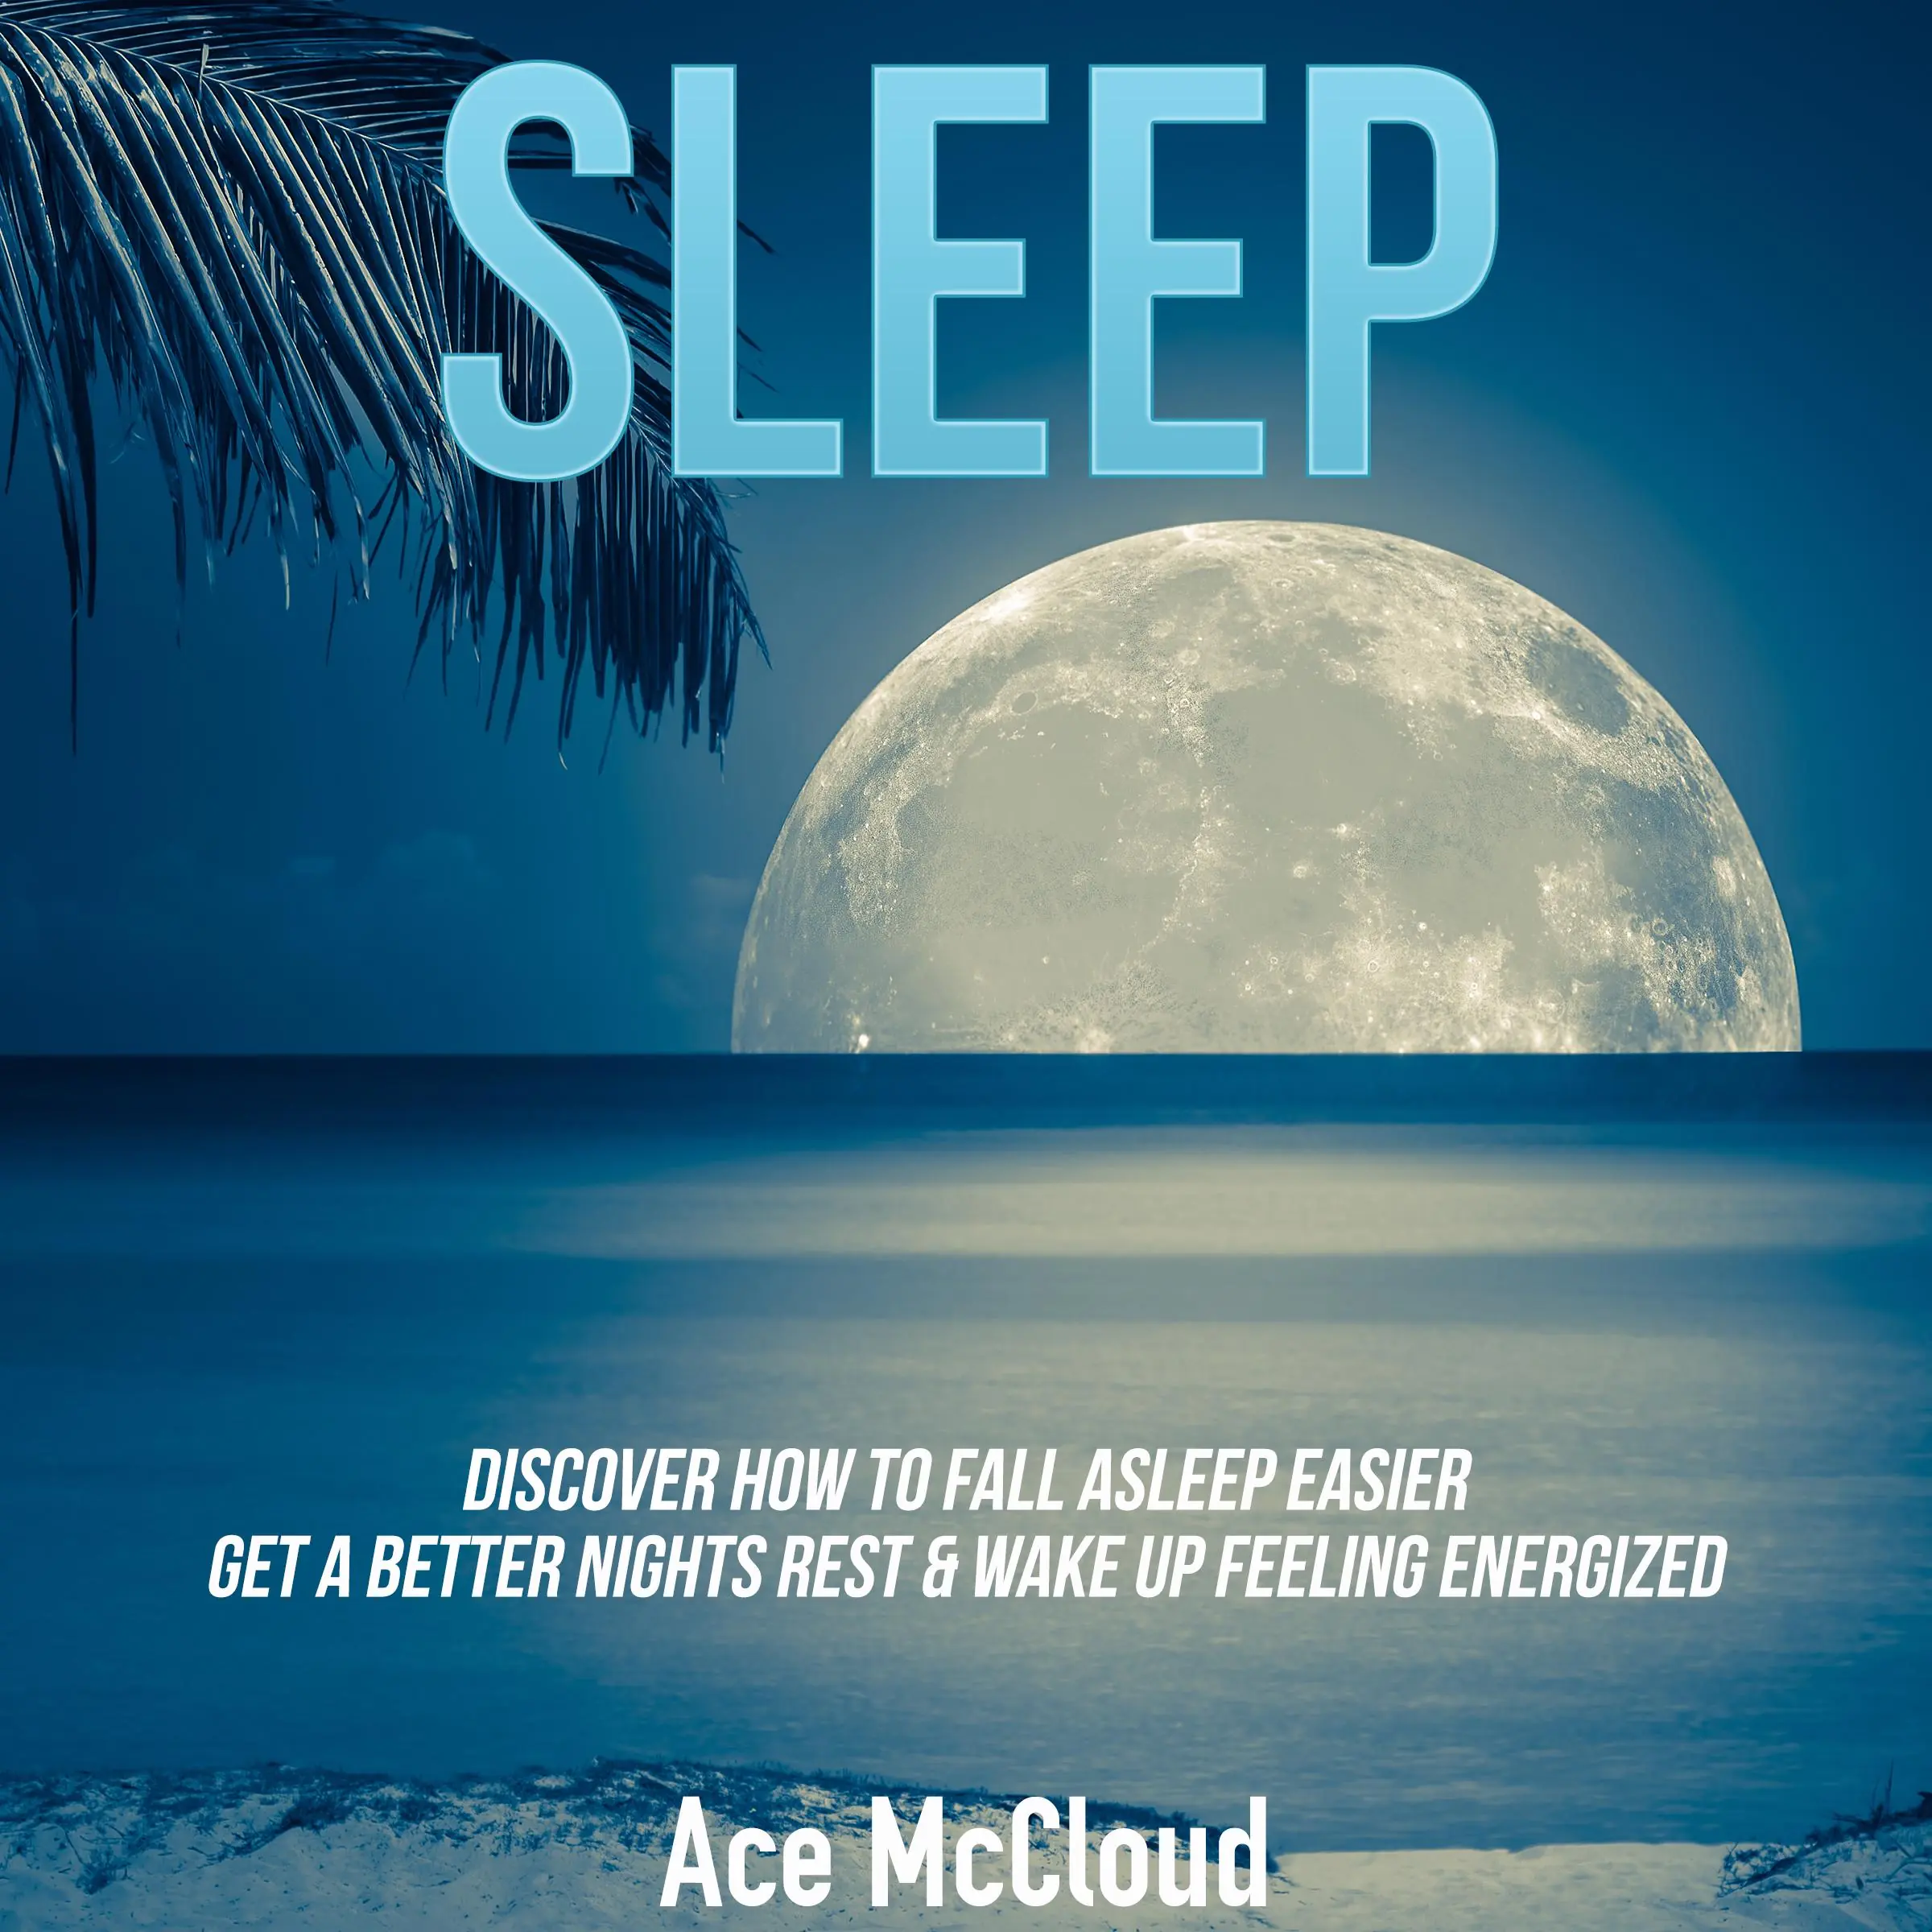 Sleep: Discover How To Fall Asleep Easier, Get A Better Nights Rest & Wake Up Feeling Energized Audiobook by Ace McCloud